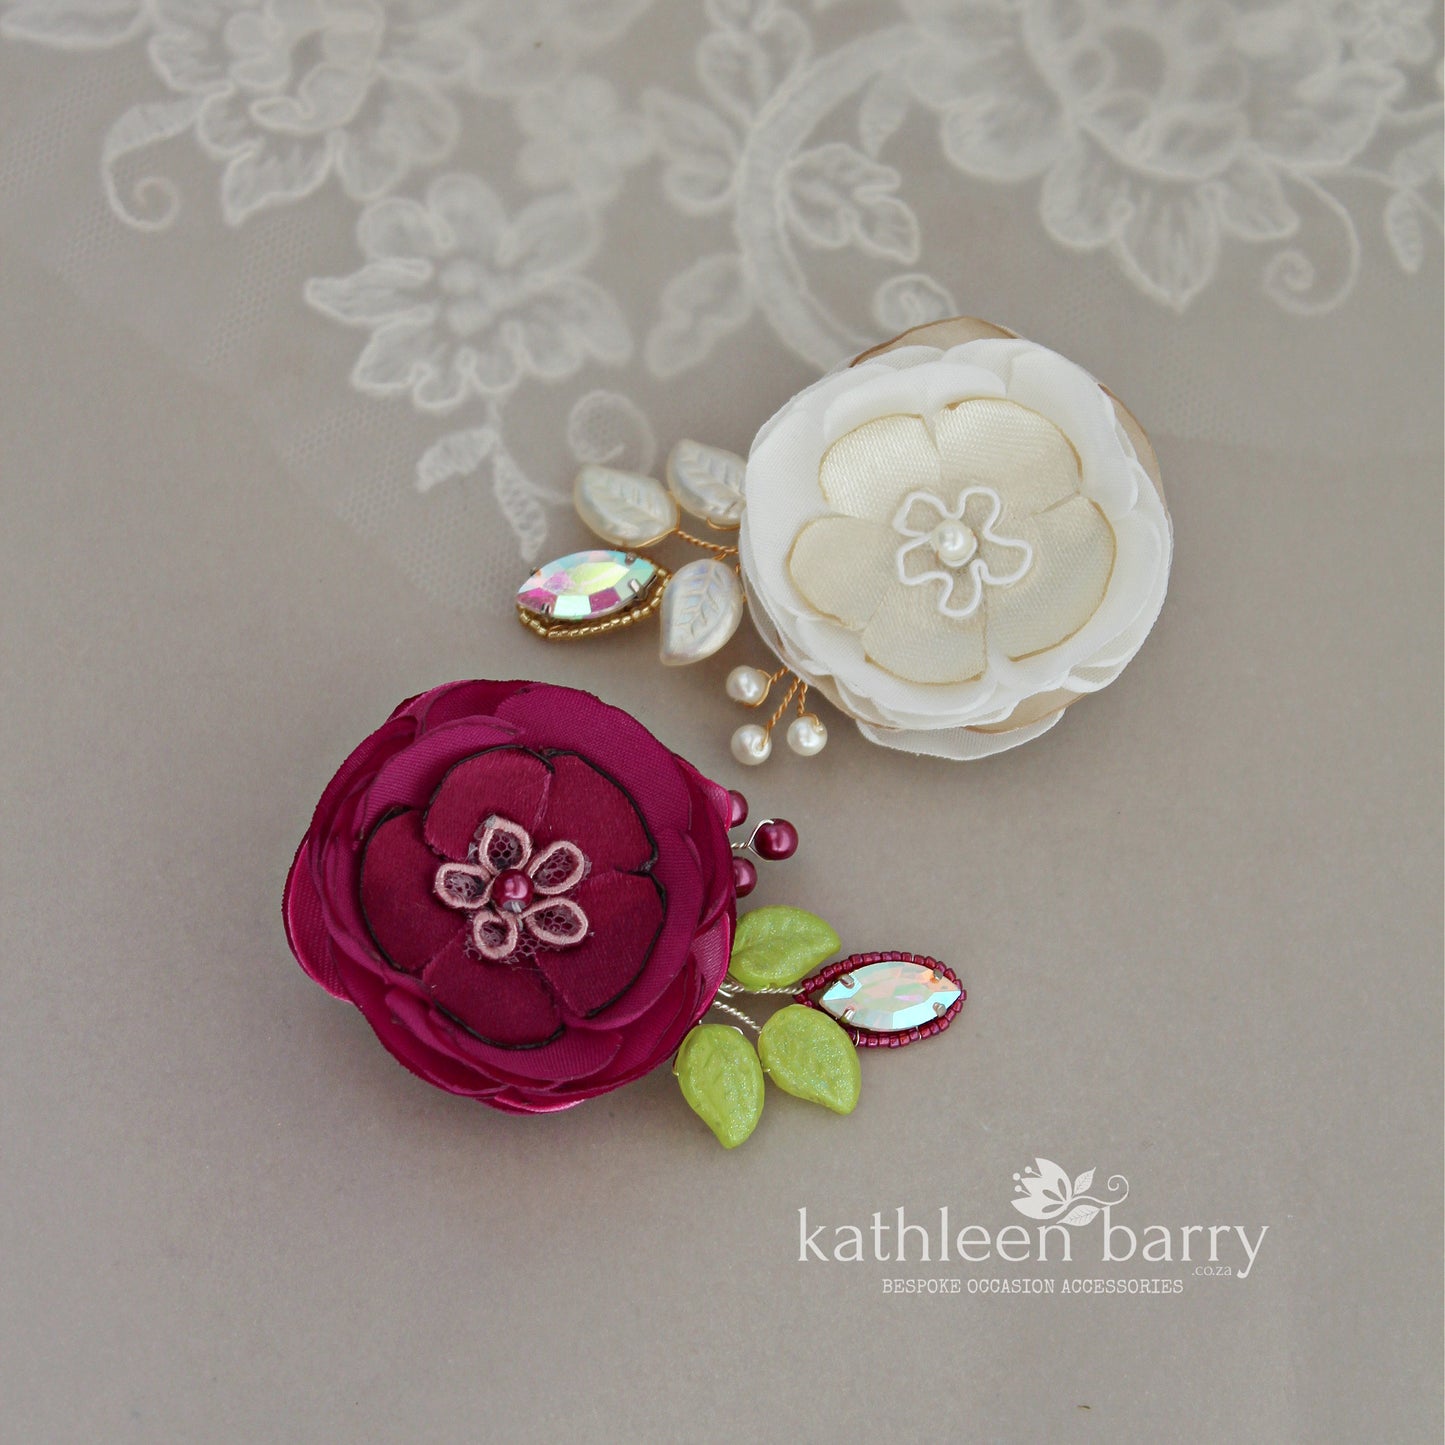 Genevieve fabric flower hair clip - assorted colors available custom colors to order